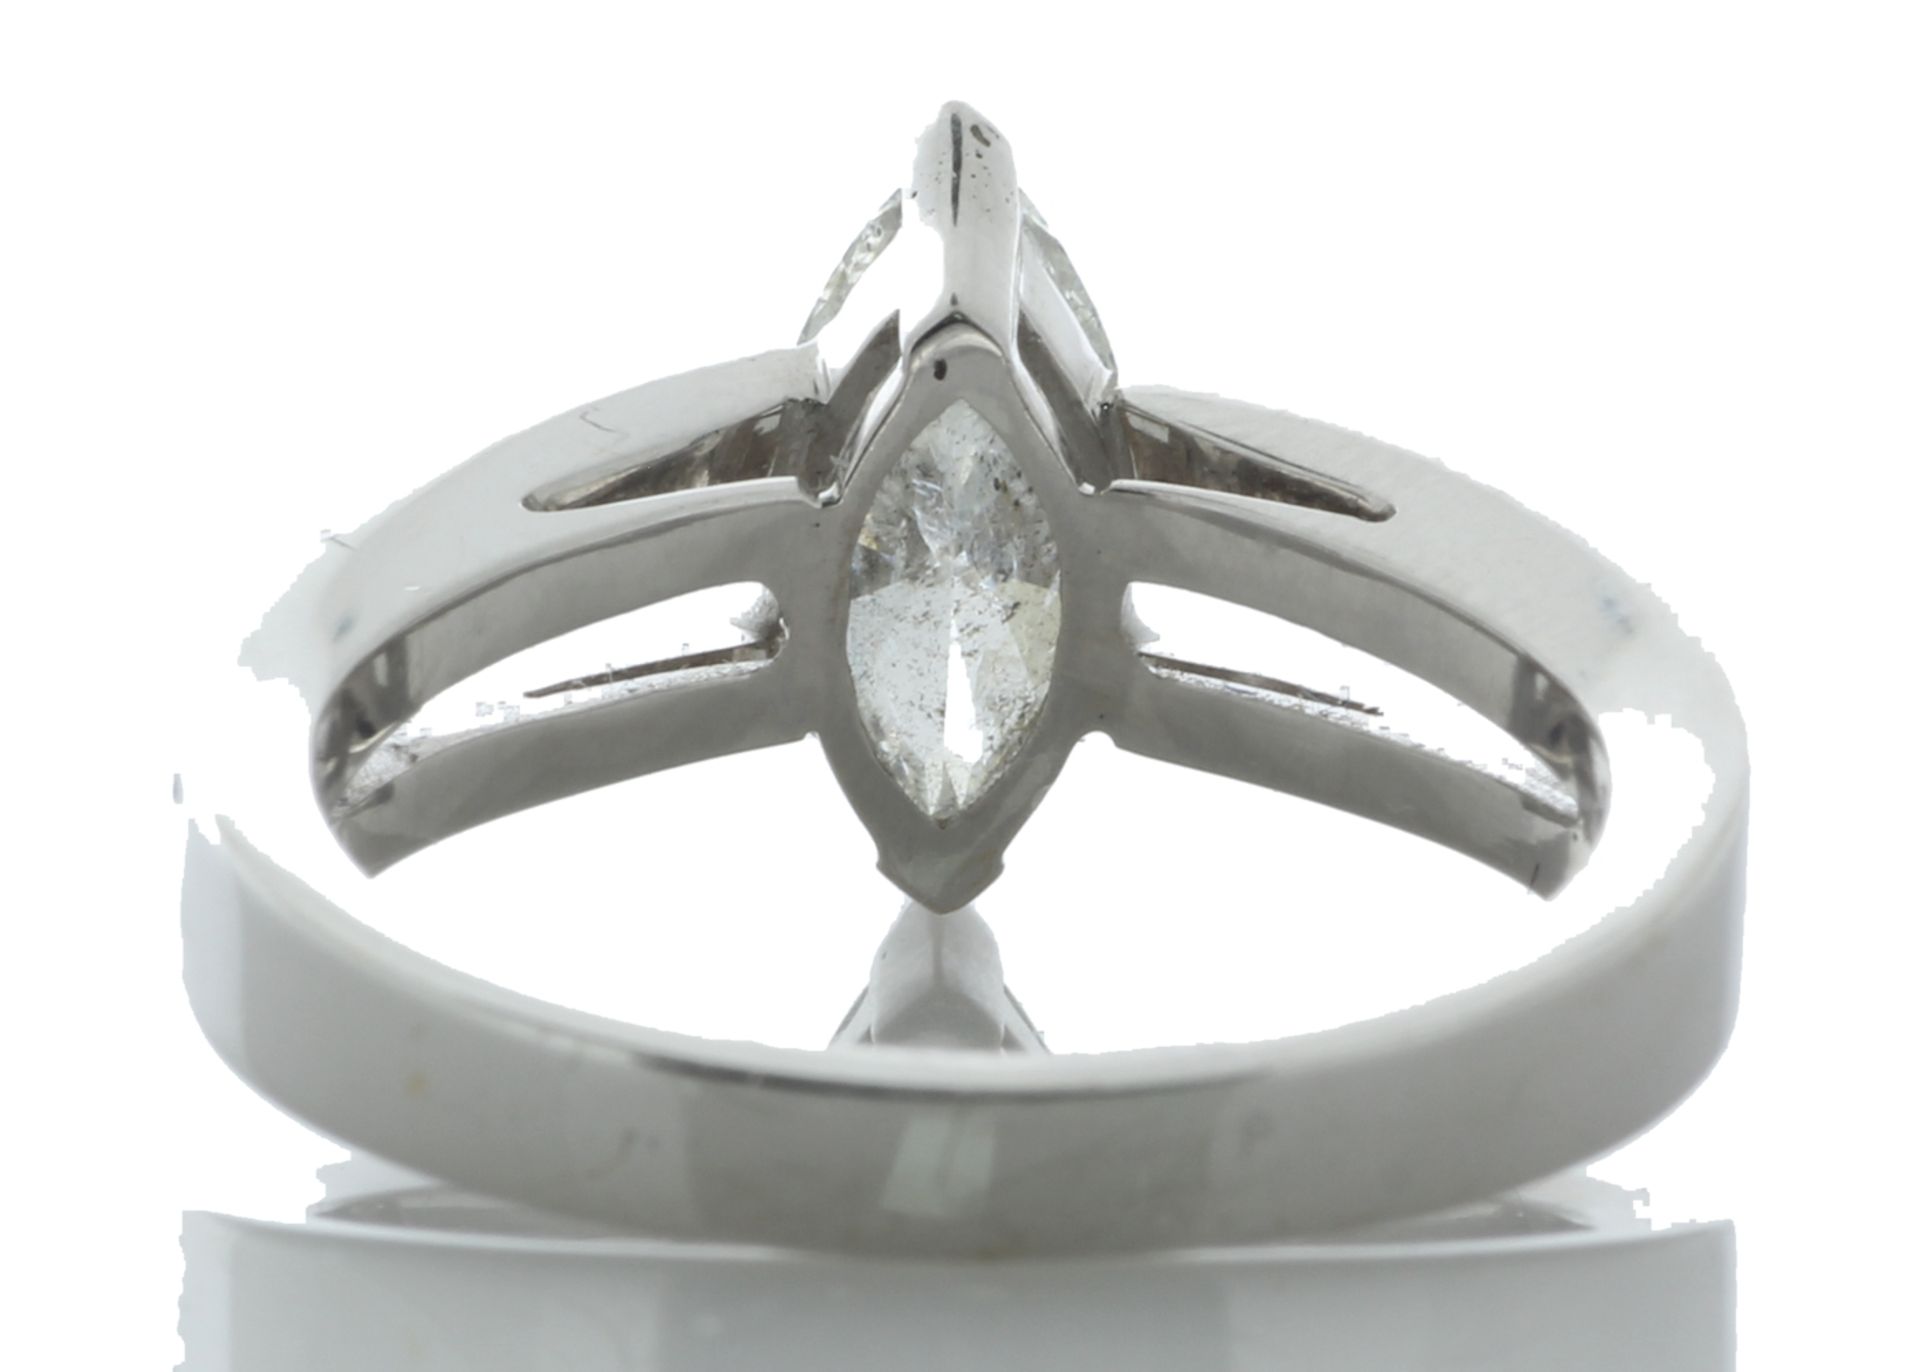 18ct White Gold Single Stone Pear Cut Diamond Ring (1.11) 1.41 Carats - Valued by GIE £17,465.00 - - Image 4 of 5